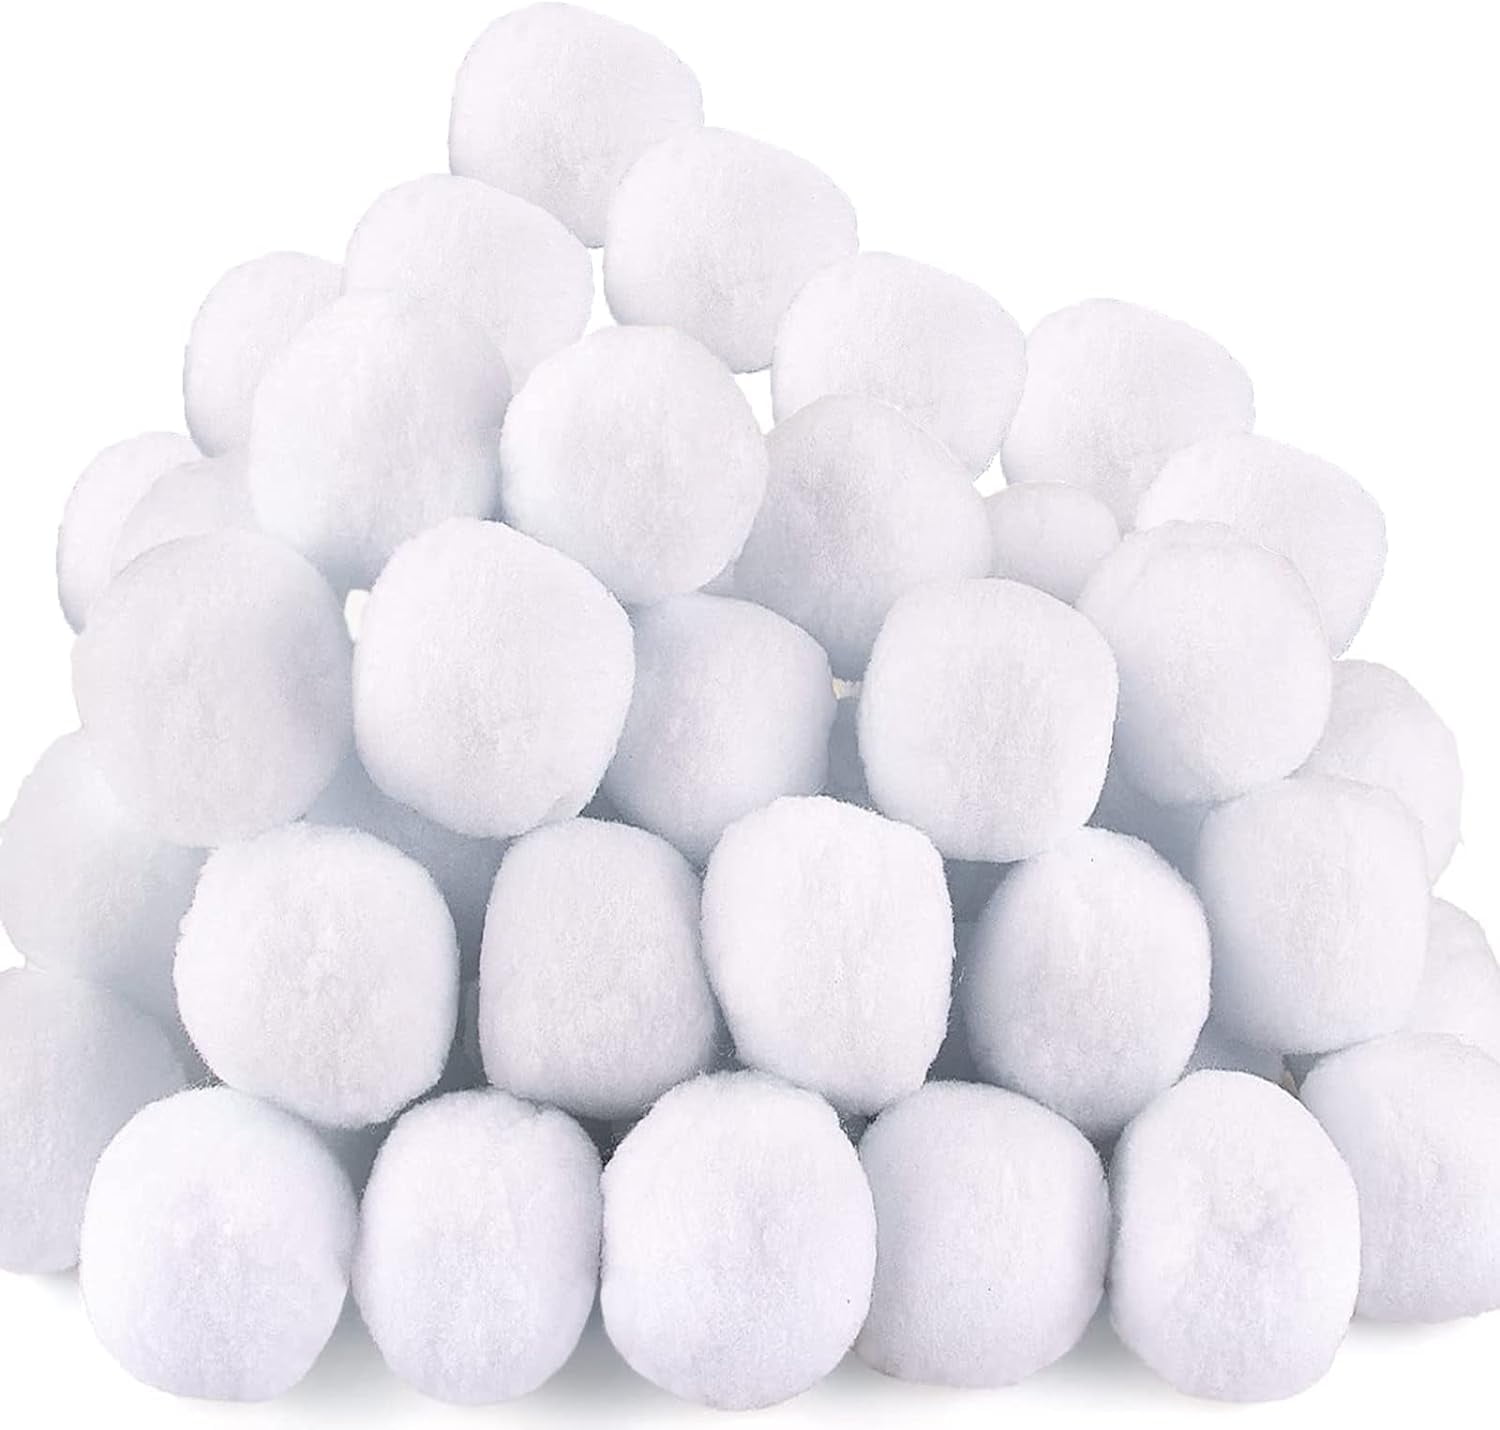 Ayieyill 50Pcs Fake Snowballs for Kids I Indoor Snowball Fight Set I  Artificial Snowballs for Kids Indoor & Outdoor I Realistic White Plush  Snowballs I Christmas Snow Decorations 